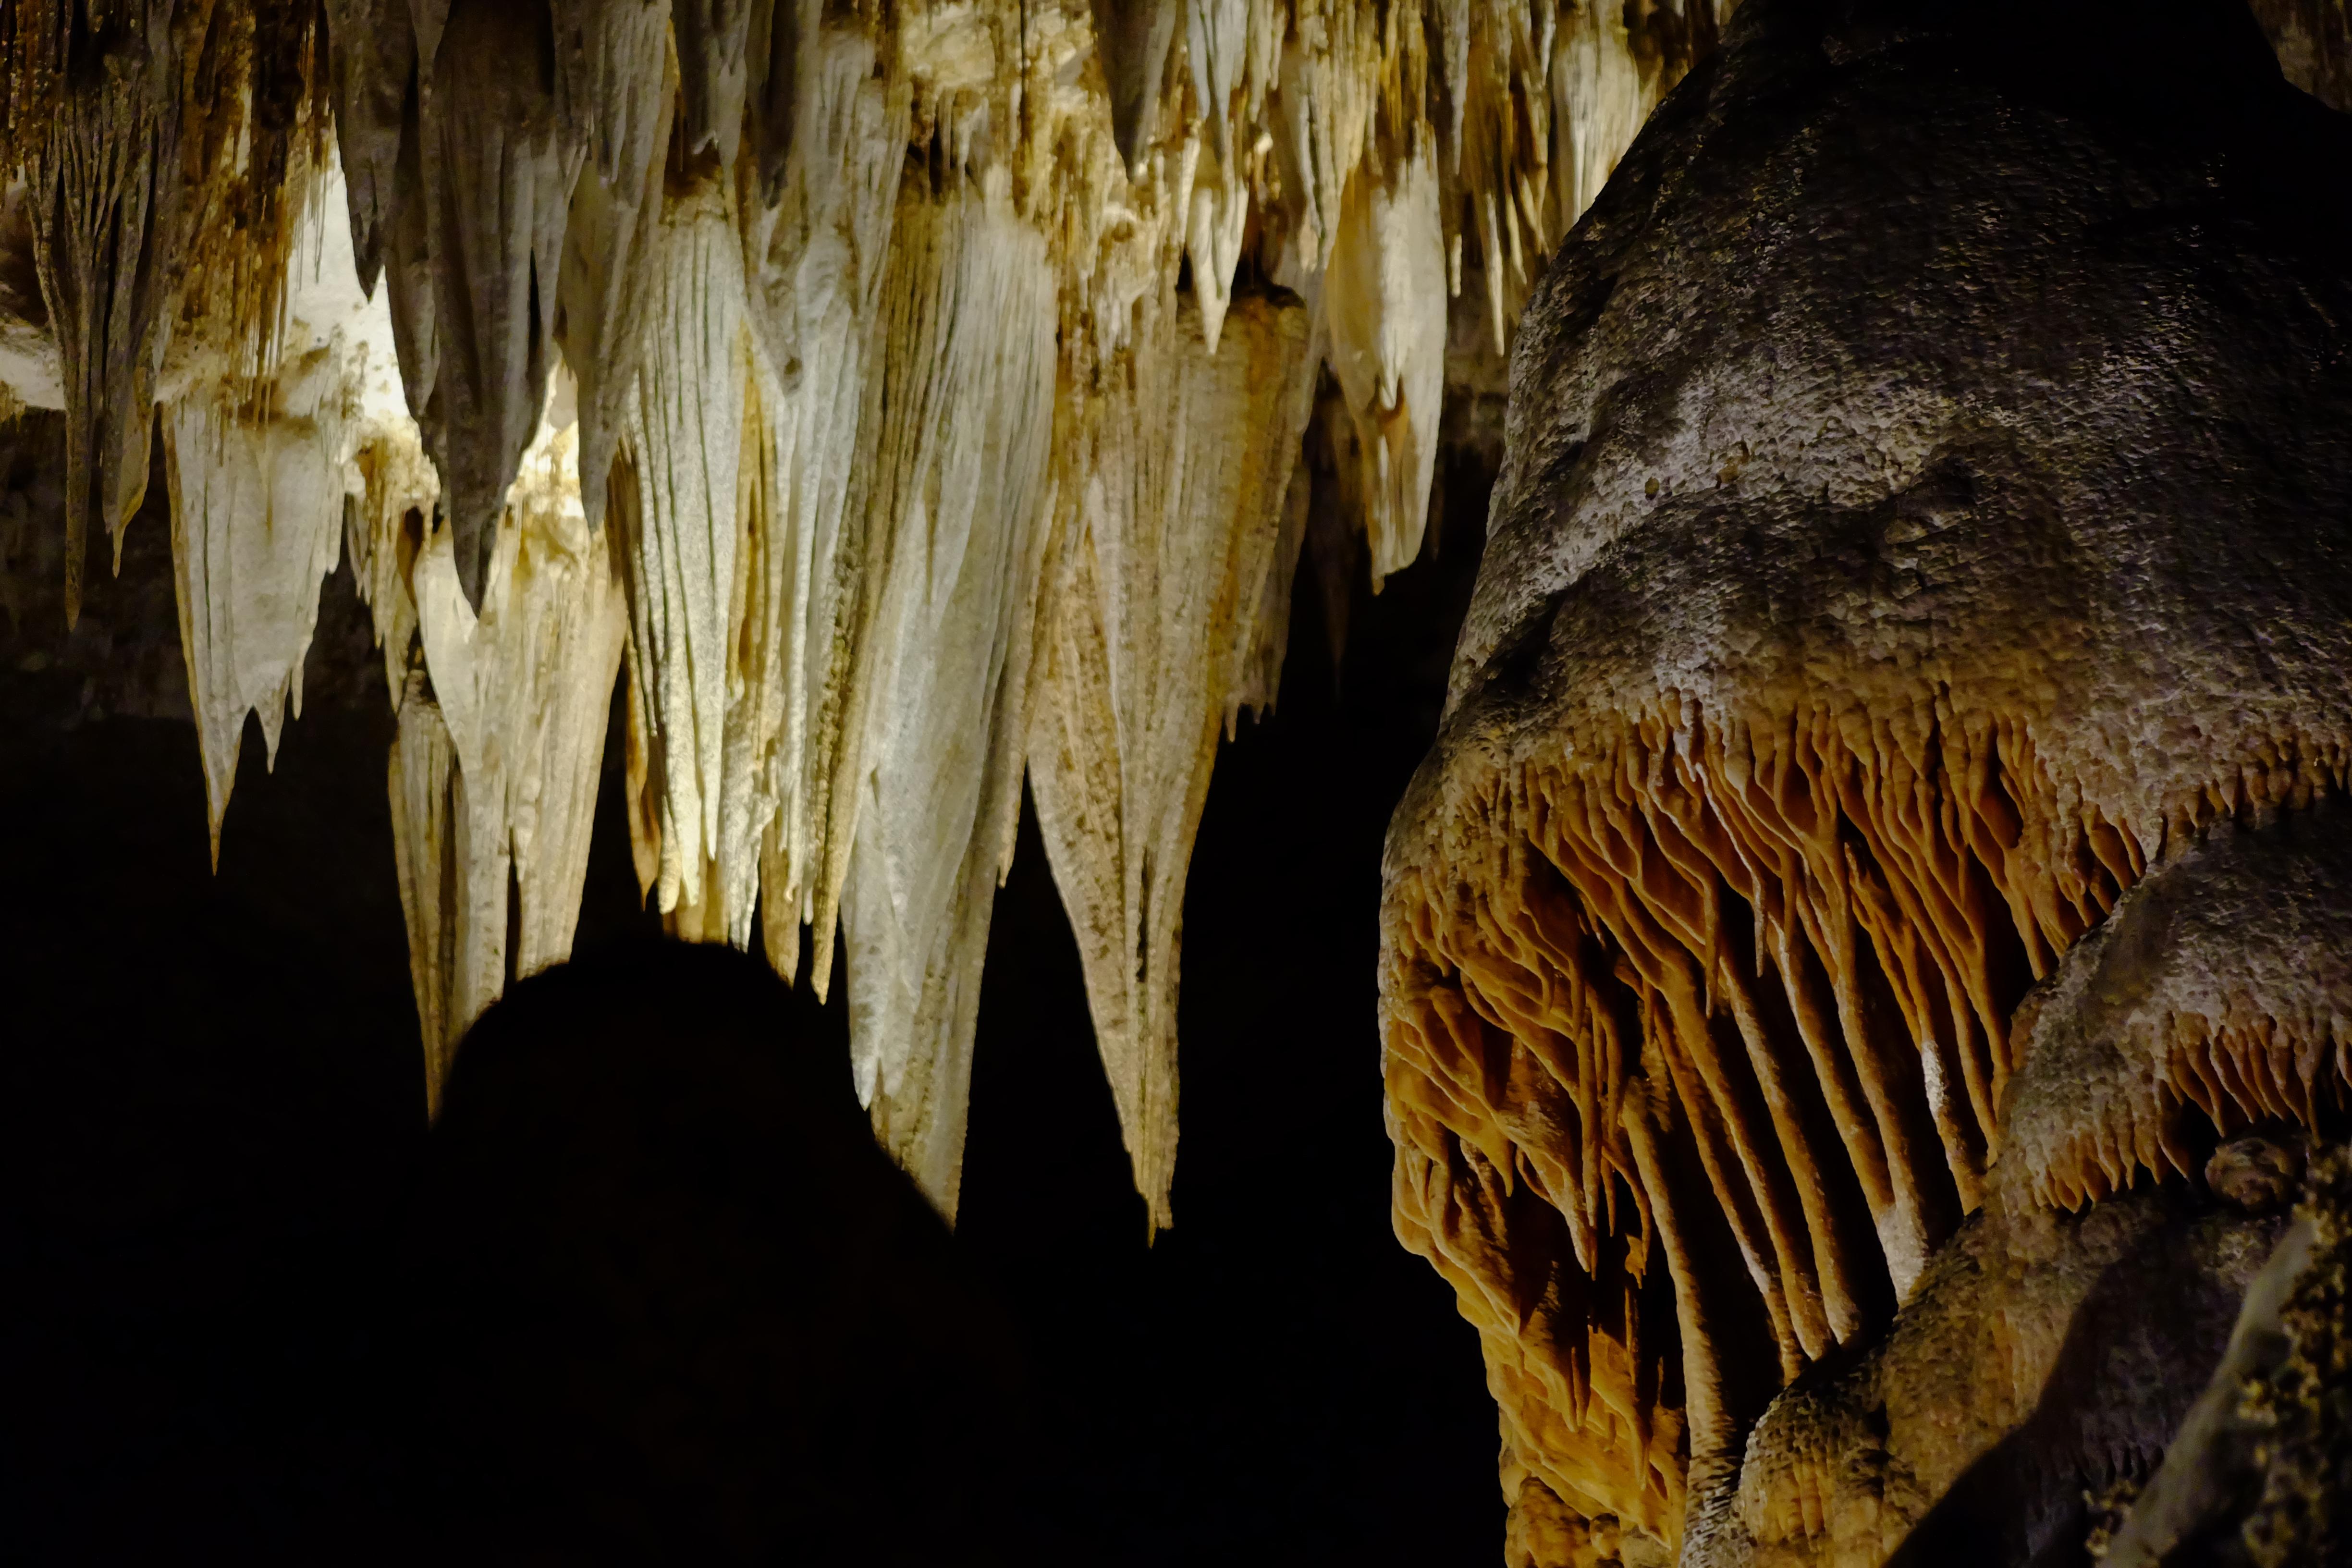 Chandelier and Caveman Formations